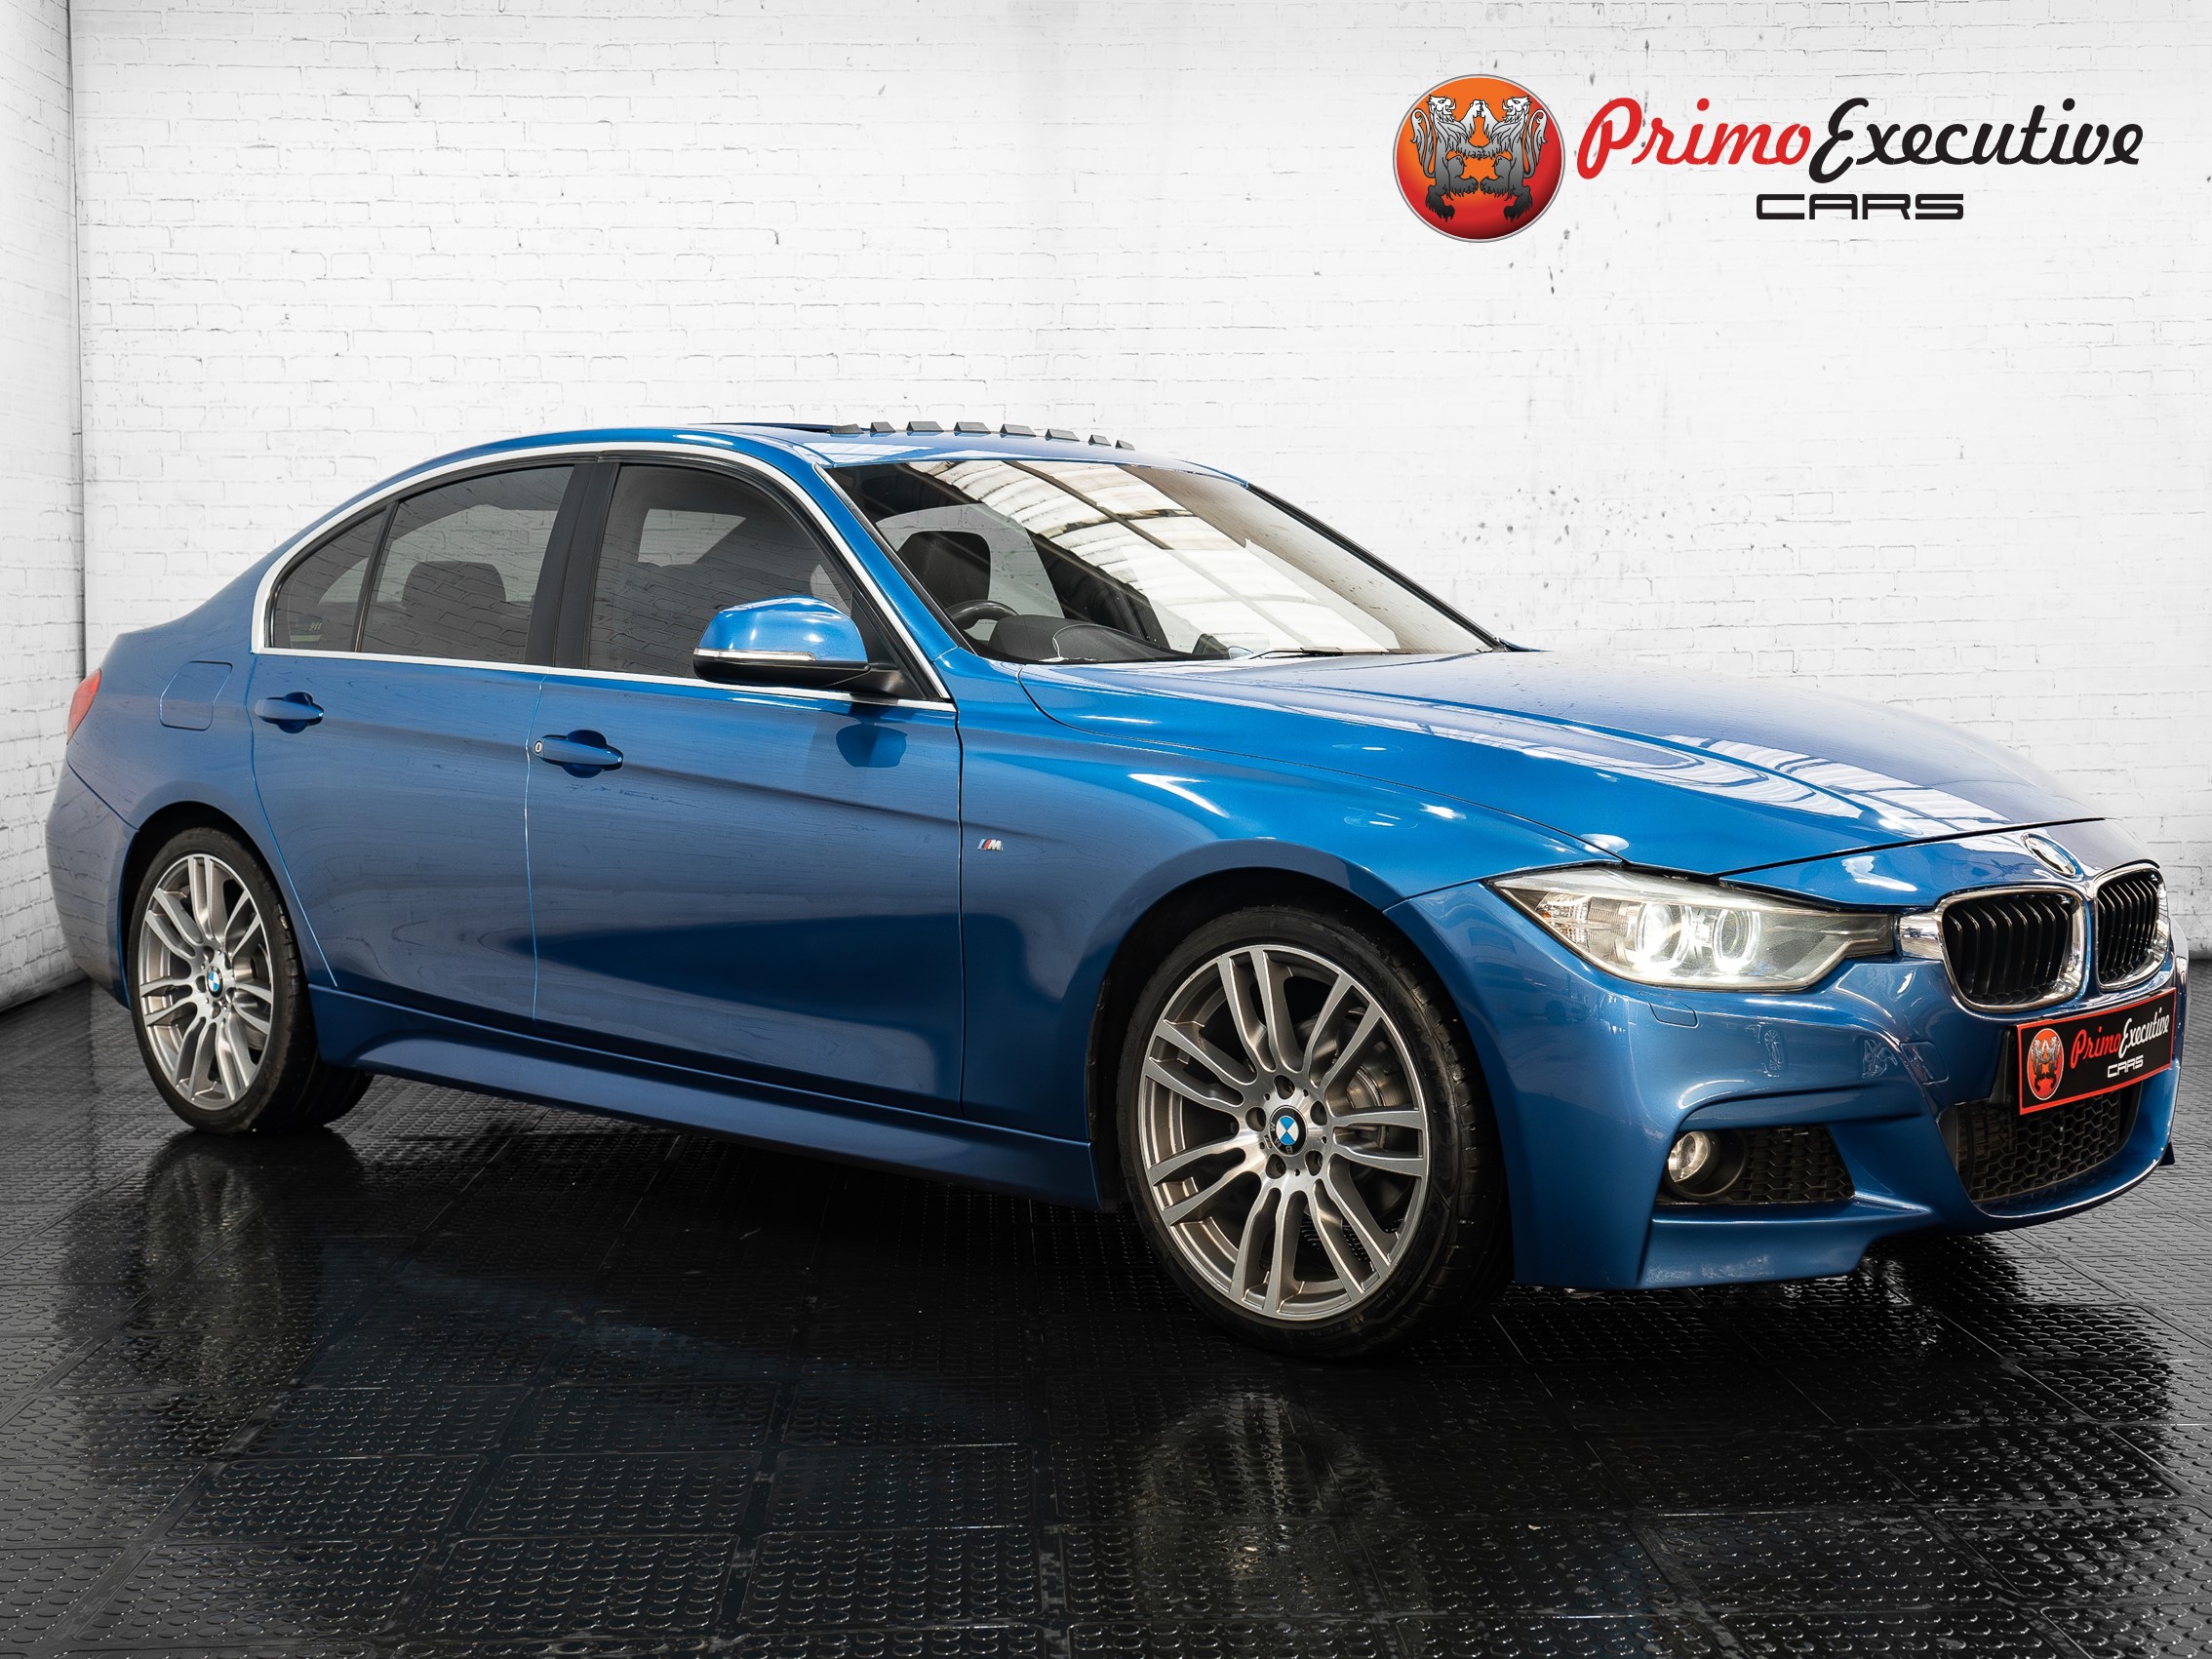 2015 BMW 3 Series  for sale - 510640